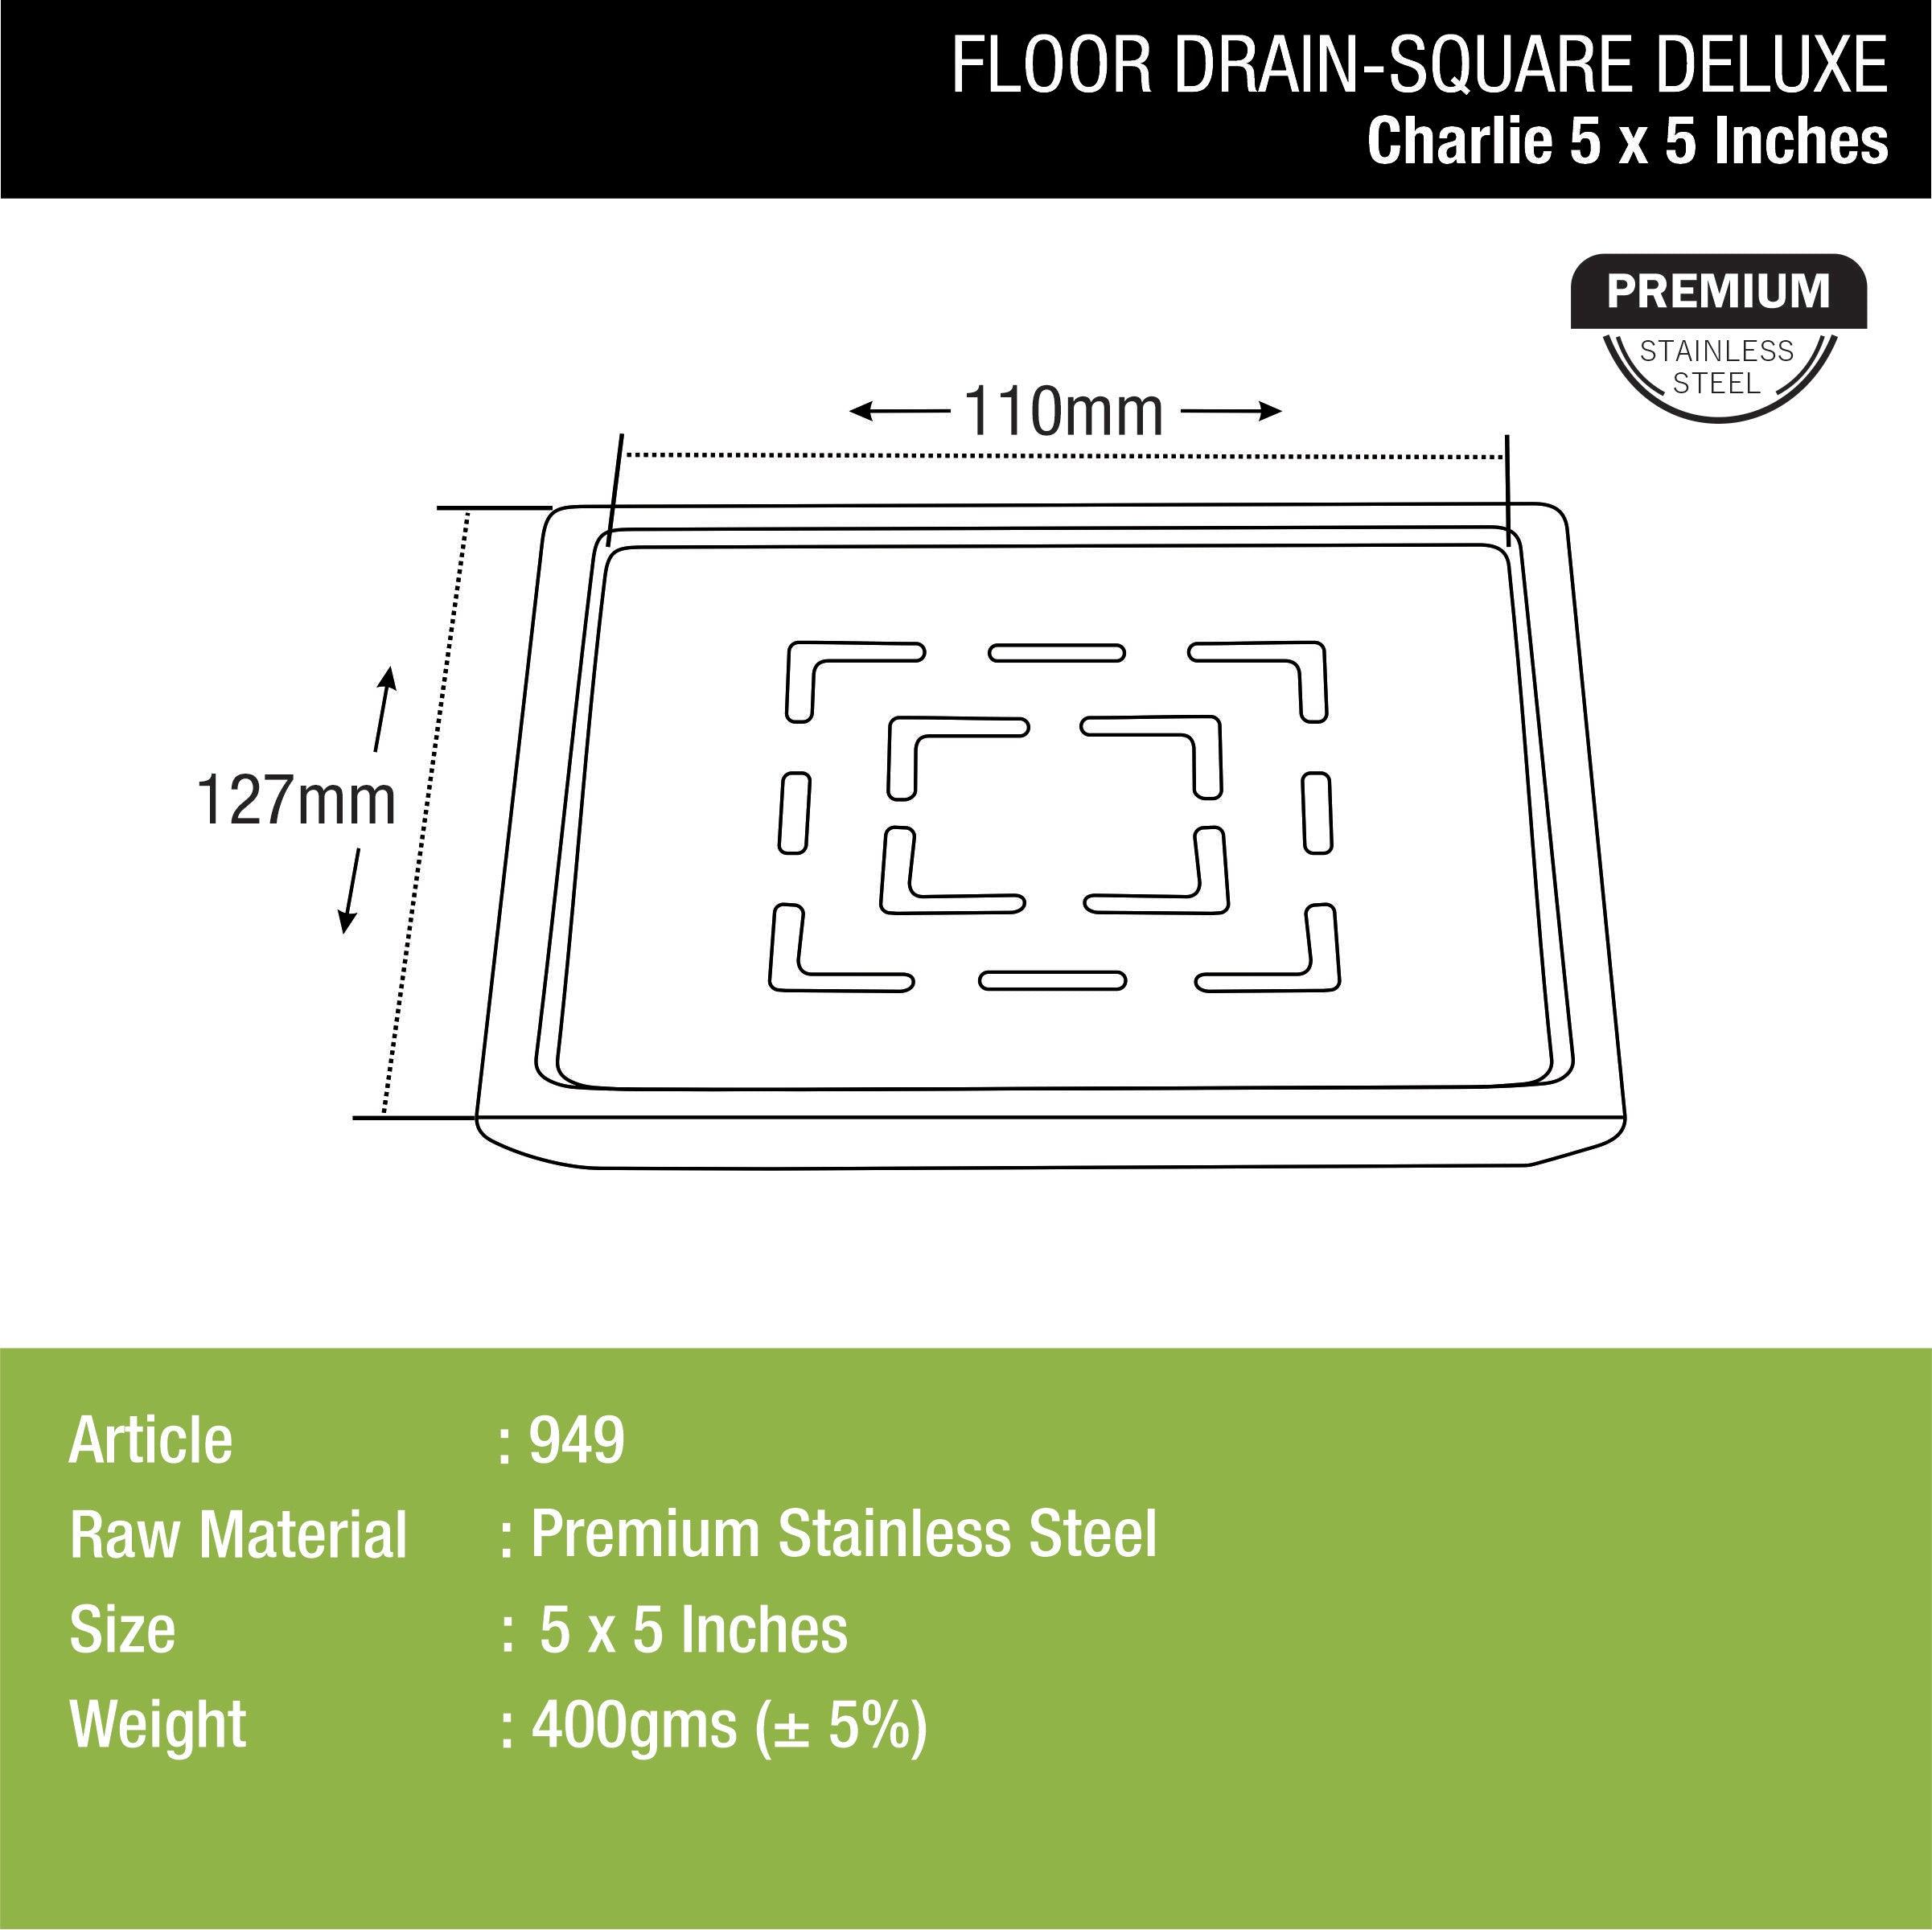 Charlie Deluxe Square Floor Drain (5 x 5) dimensions and sizes